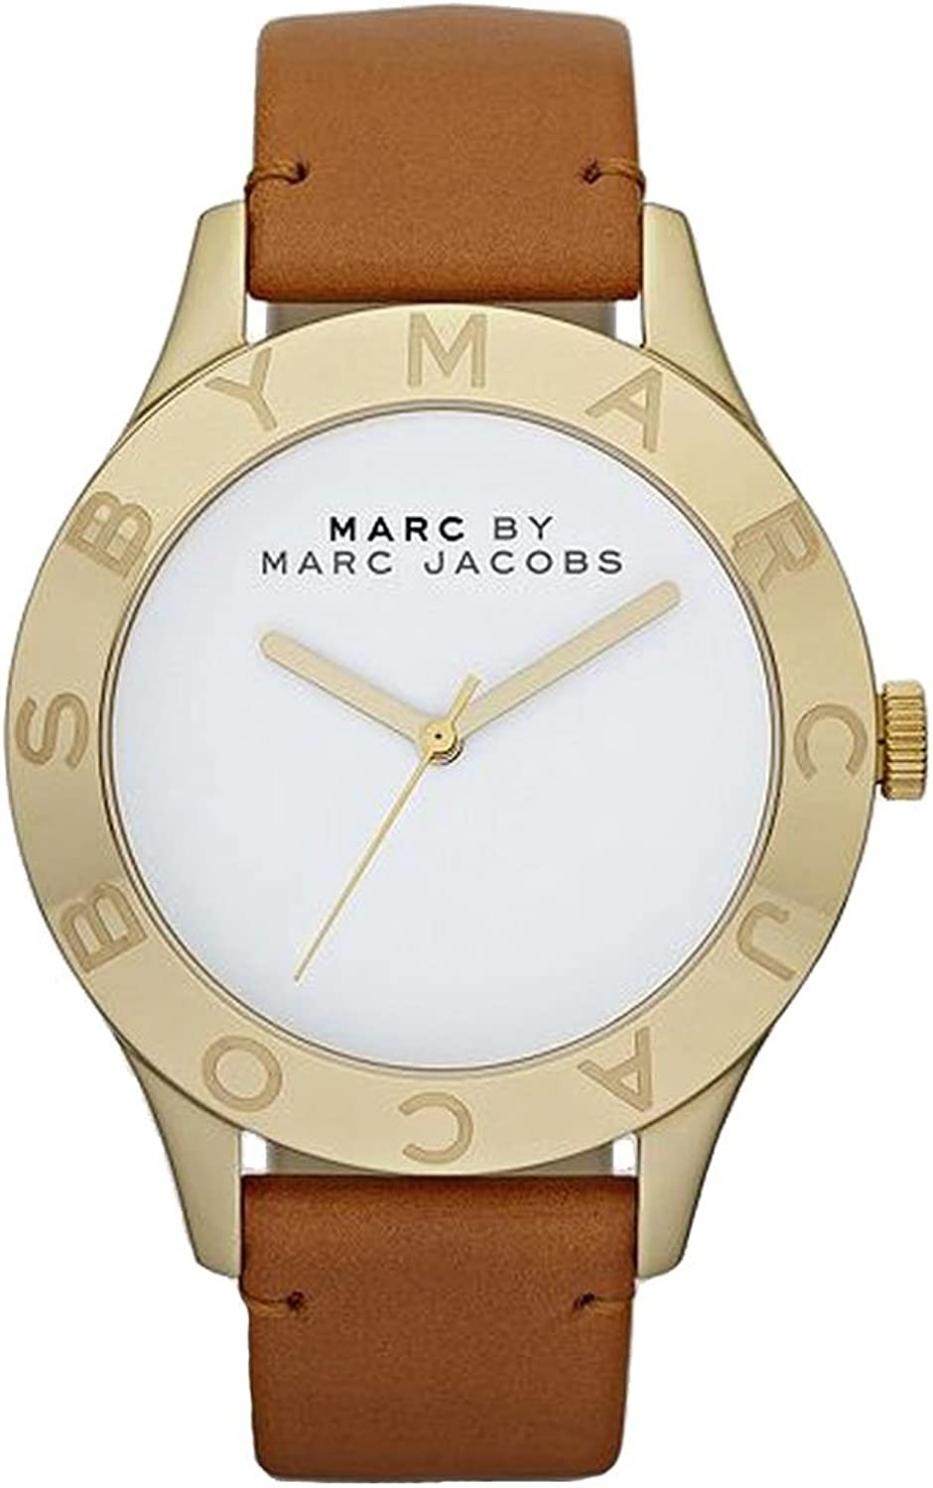 Marc by Marc Jacobs MBM1218 - Blade Tan/Gold One Size